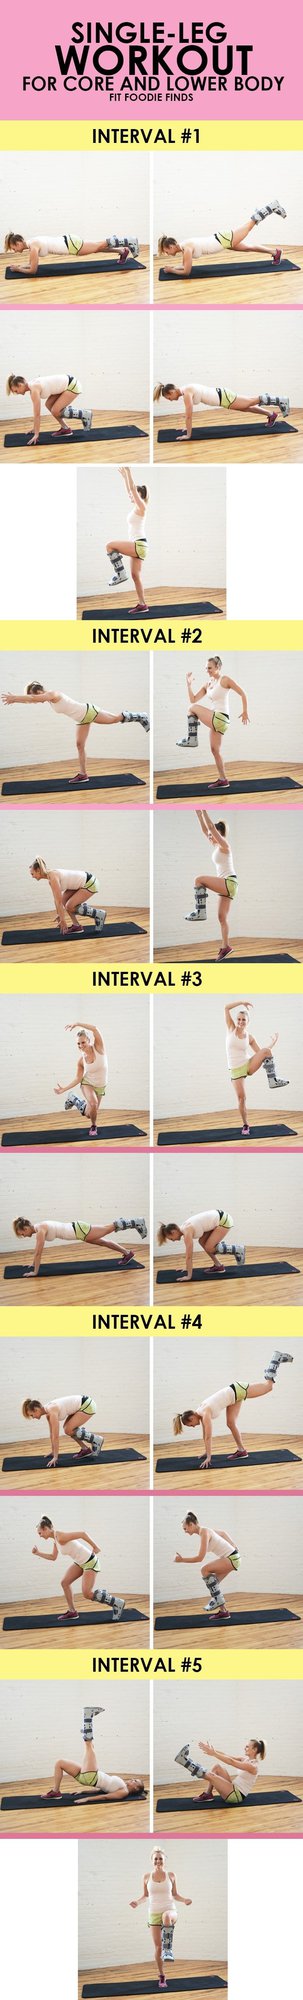 single-leg-workout-for-core-and-lower-body